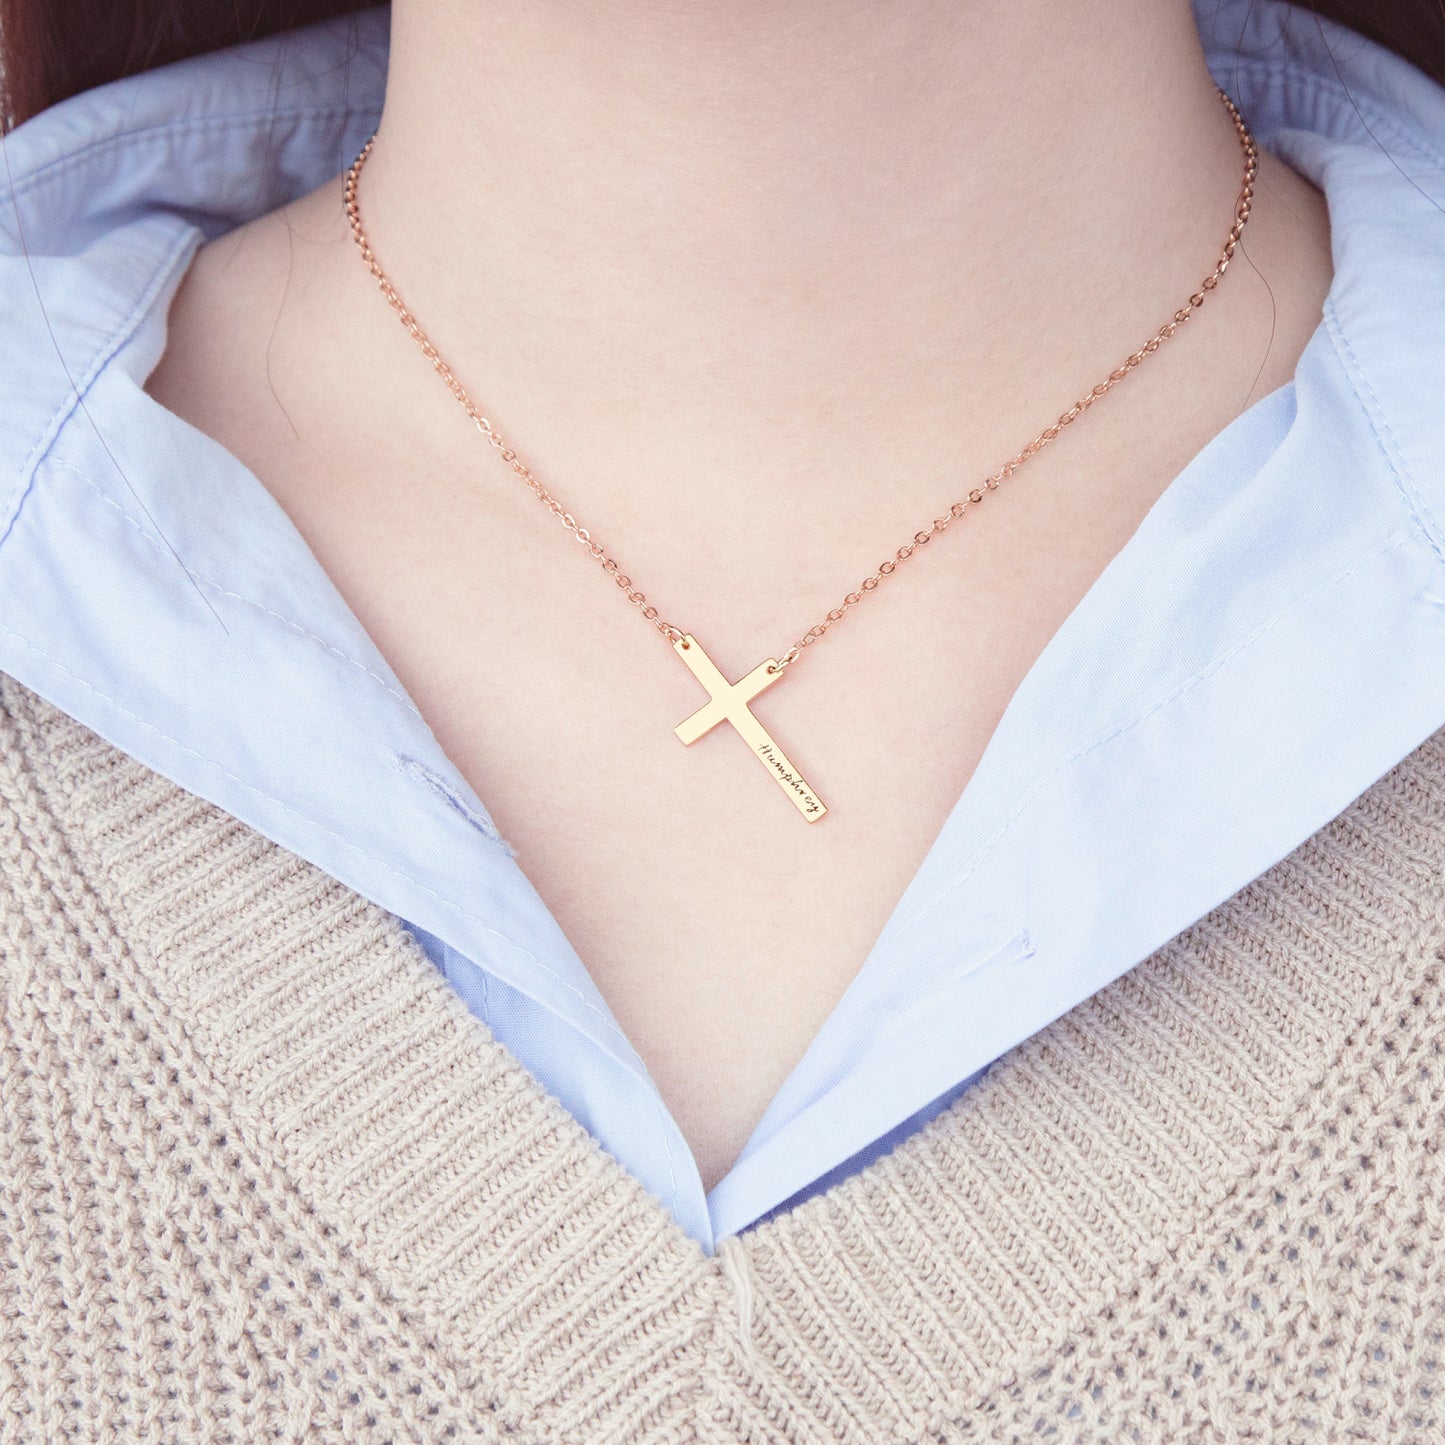 Cross Name Necklace - Customize with your name